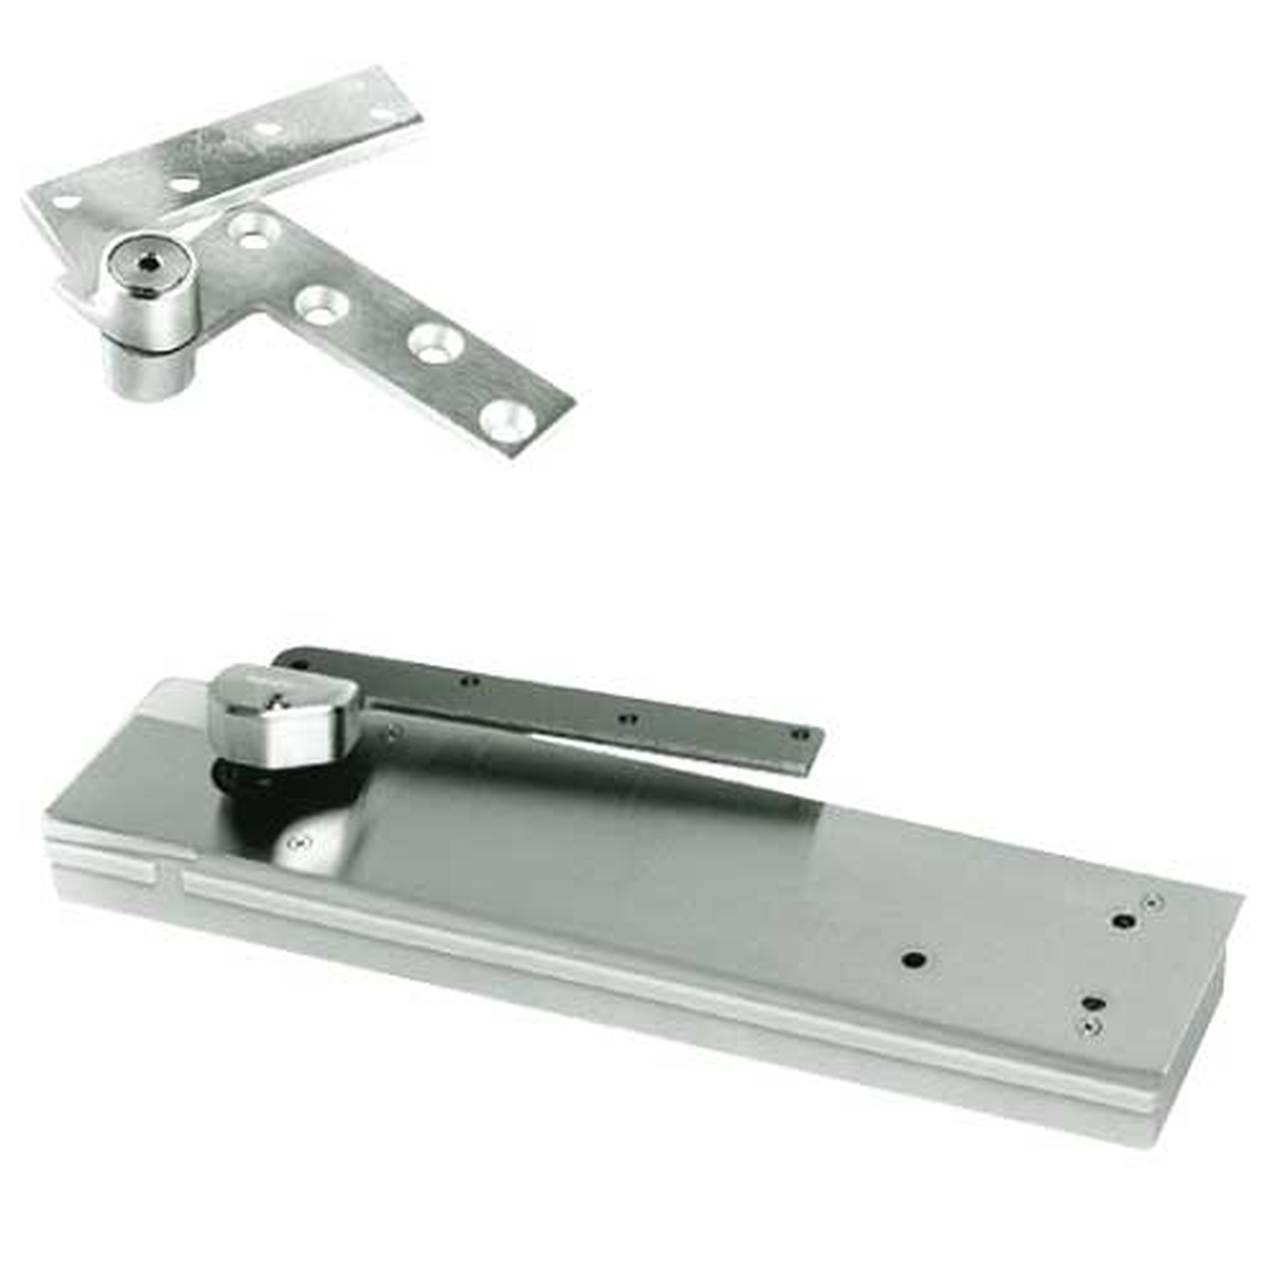 FHM5105NBC-LFP-RH-618 Rixson HM51 Series 3/4" Offset Hung Shallow Depth Floor Closers in Bright Nickel Finish